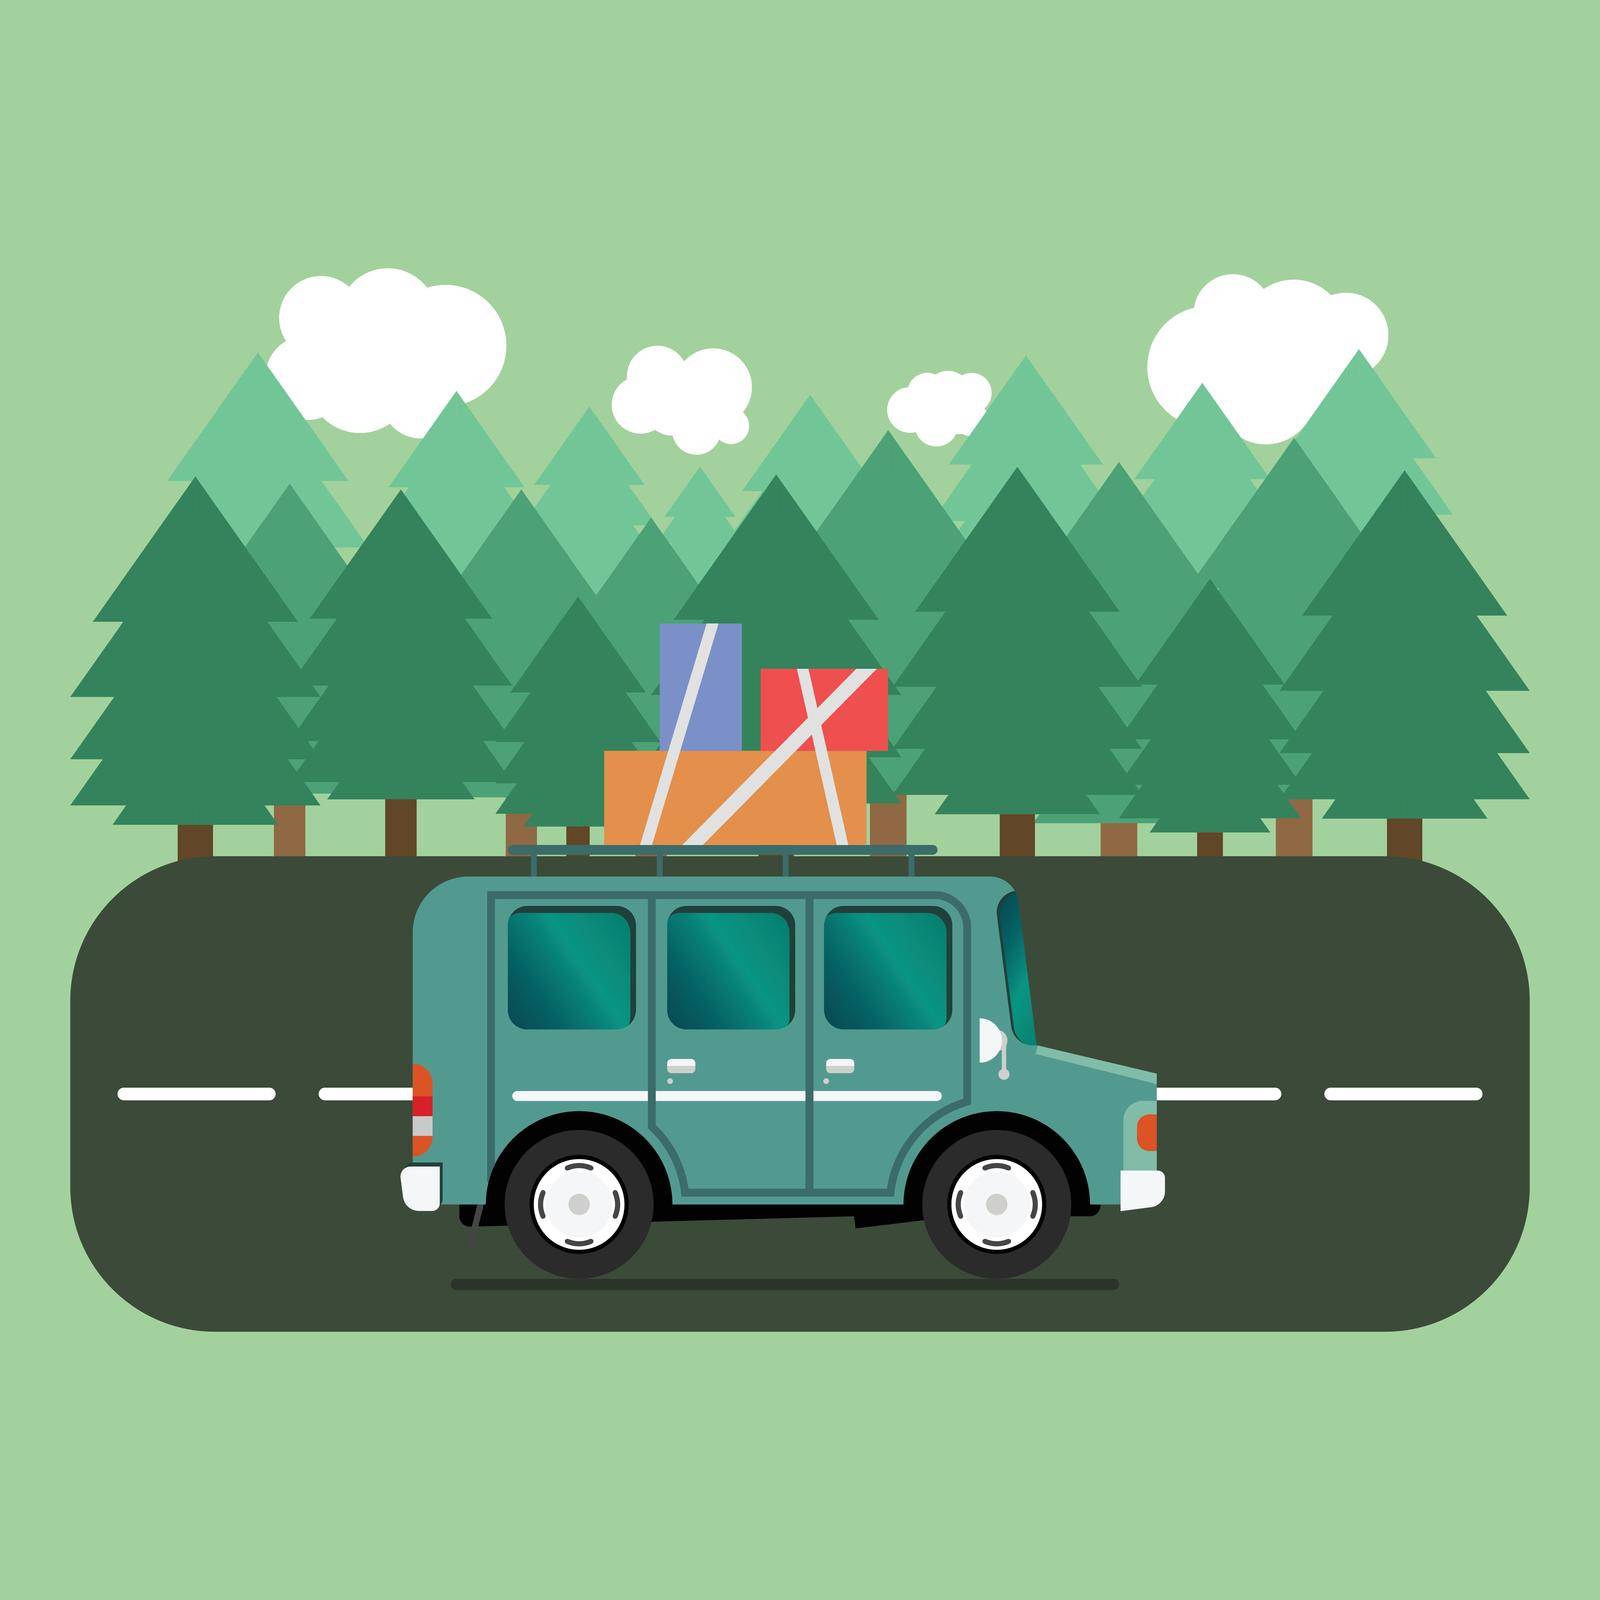 Travel car campsite place landscape. Forest, trees, fir tree and road. Vector illustration in flat style.